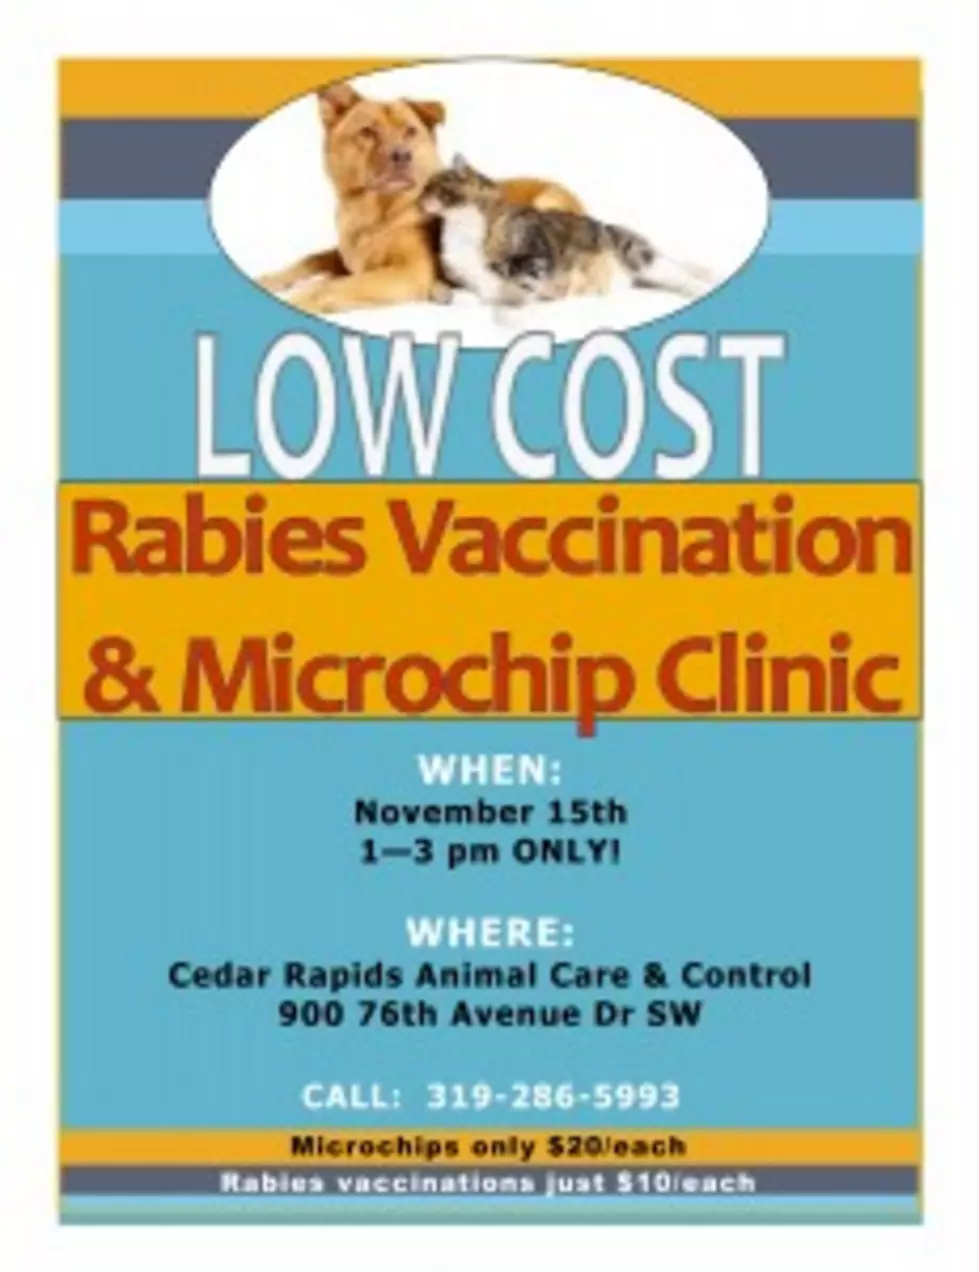 Cedar Rapids Animal Care and Control Offering Low-Cost Rabies and Micro-Chipping Next Saturday